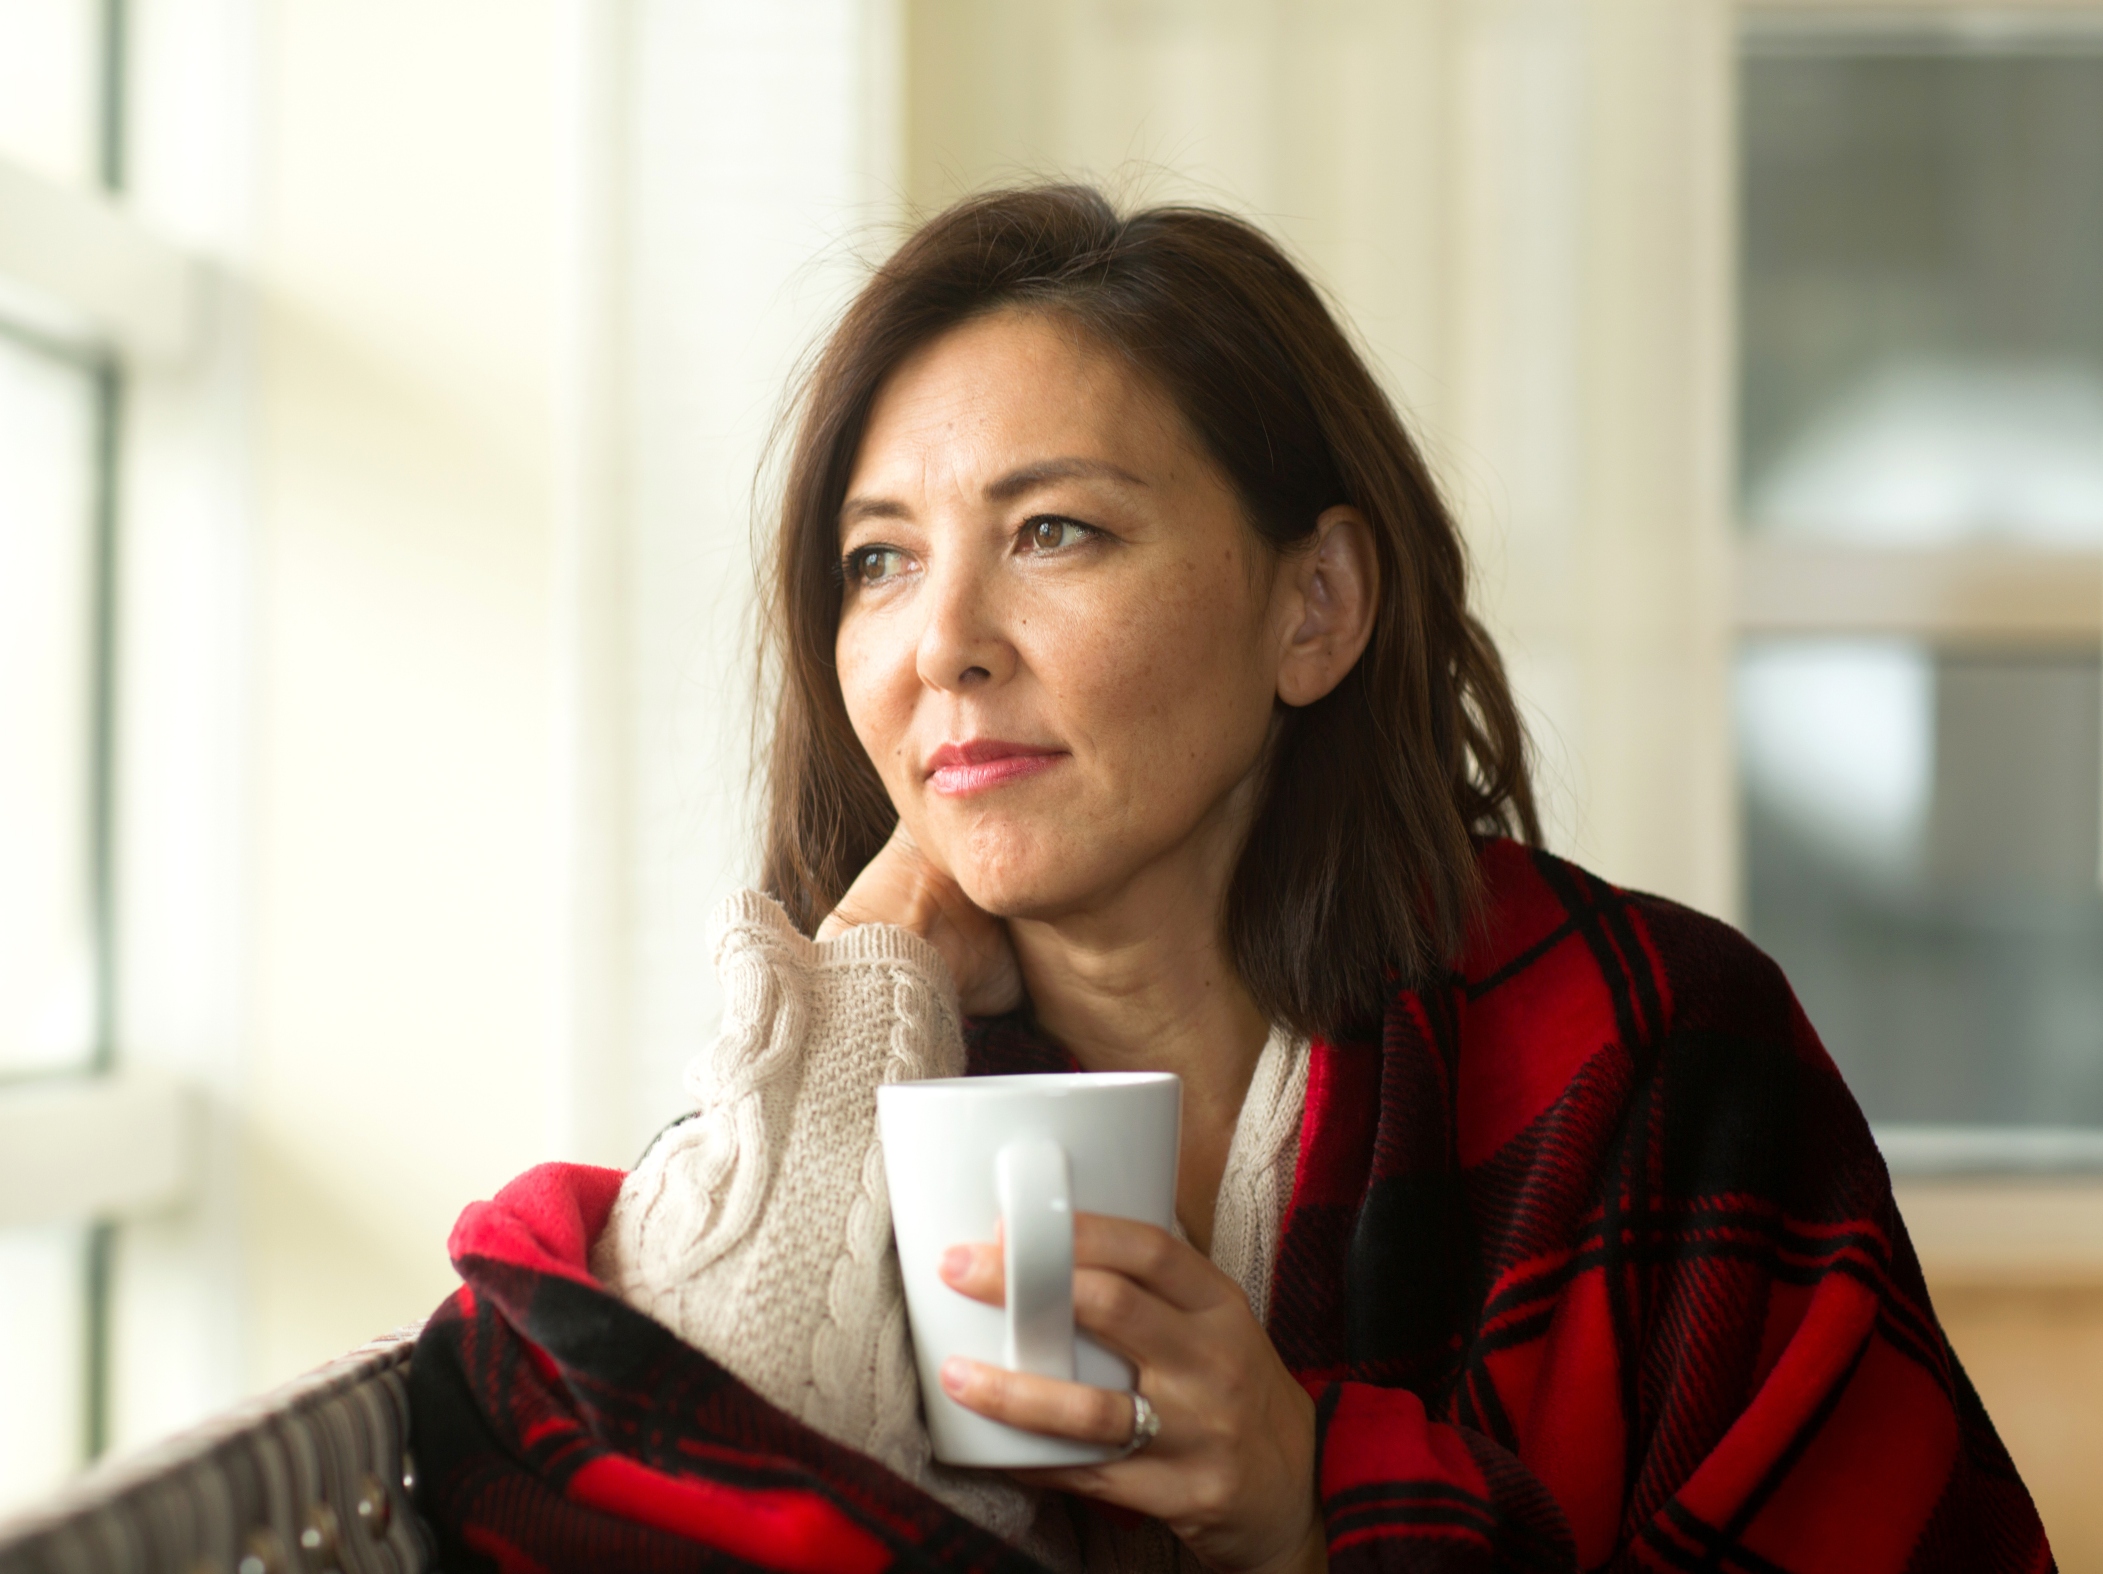 Woman sitting on couch with a blanket and cup of coffee.